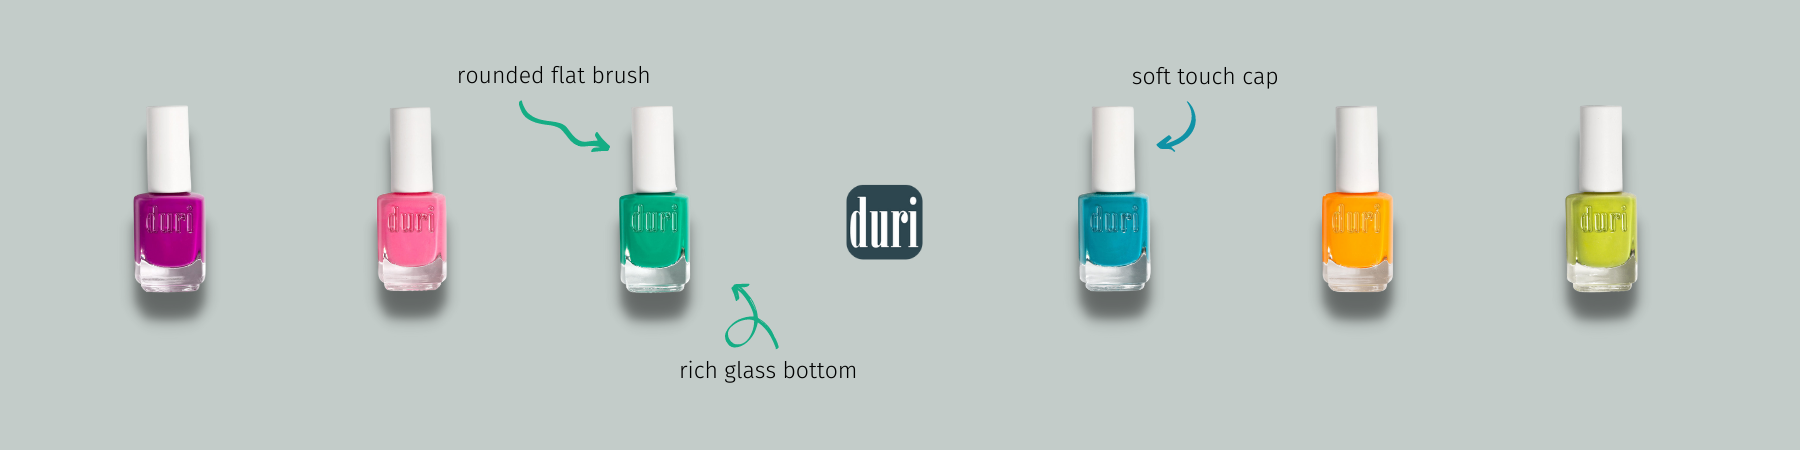 duri cosmetics brand new and improved nail polish bottle blog post